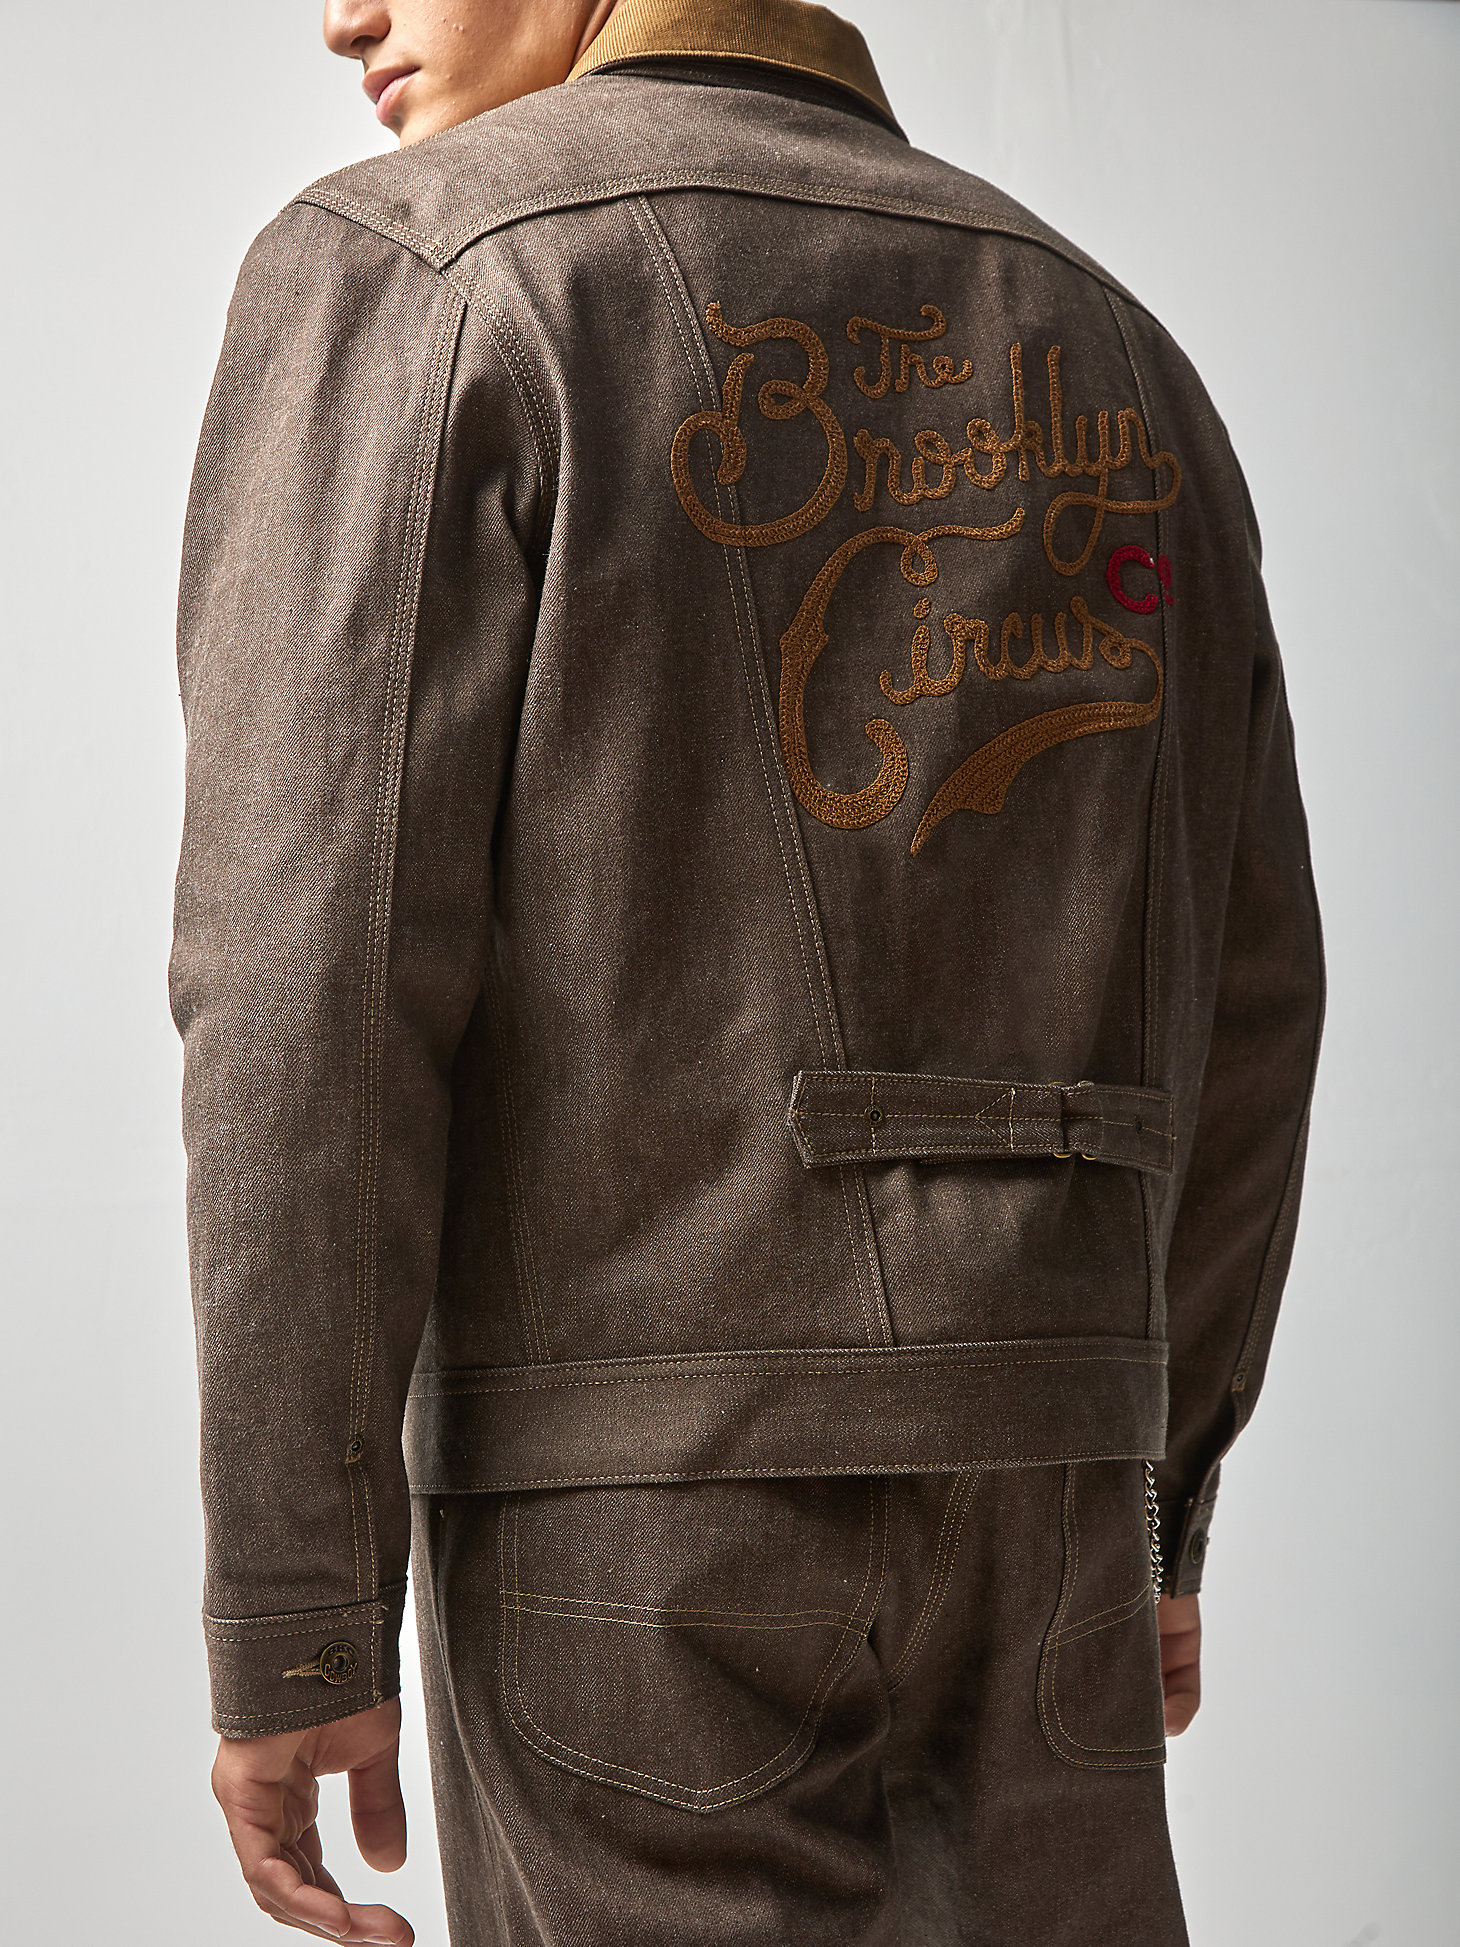 Men's Lee® x The Brooklyn Circus® 1930's Cowboy Jacket in Brown Selvedge alternative view 2